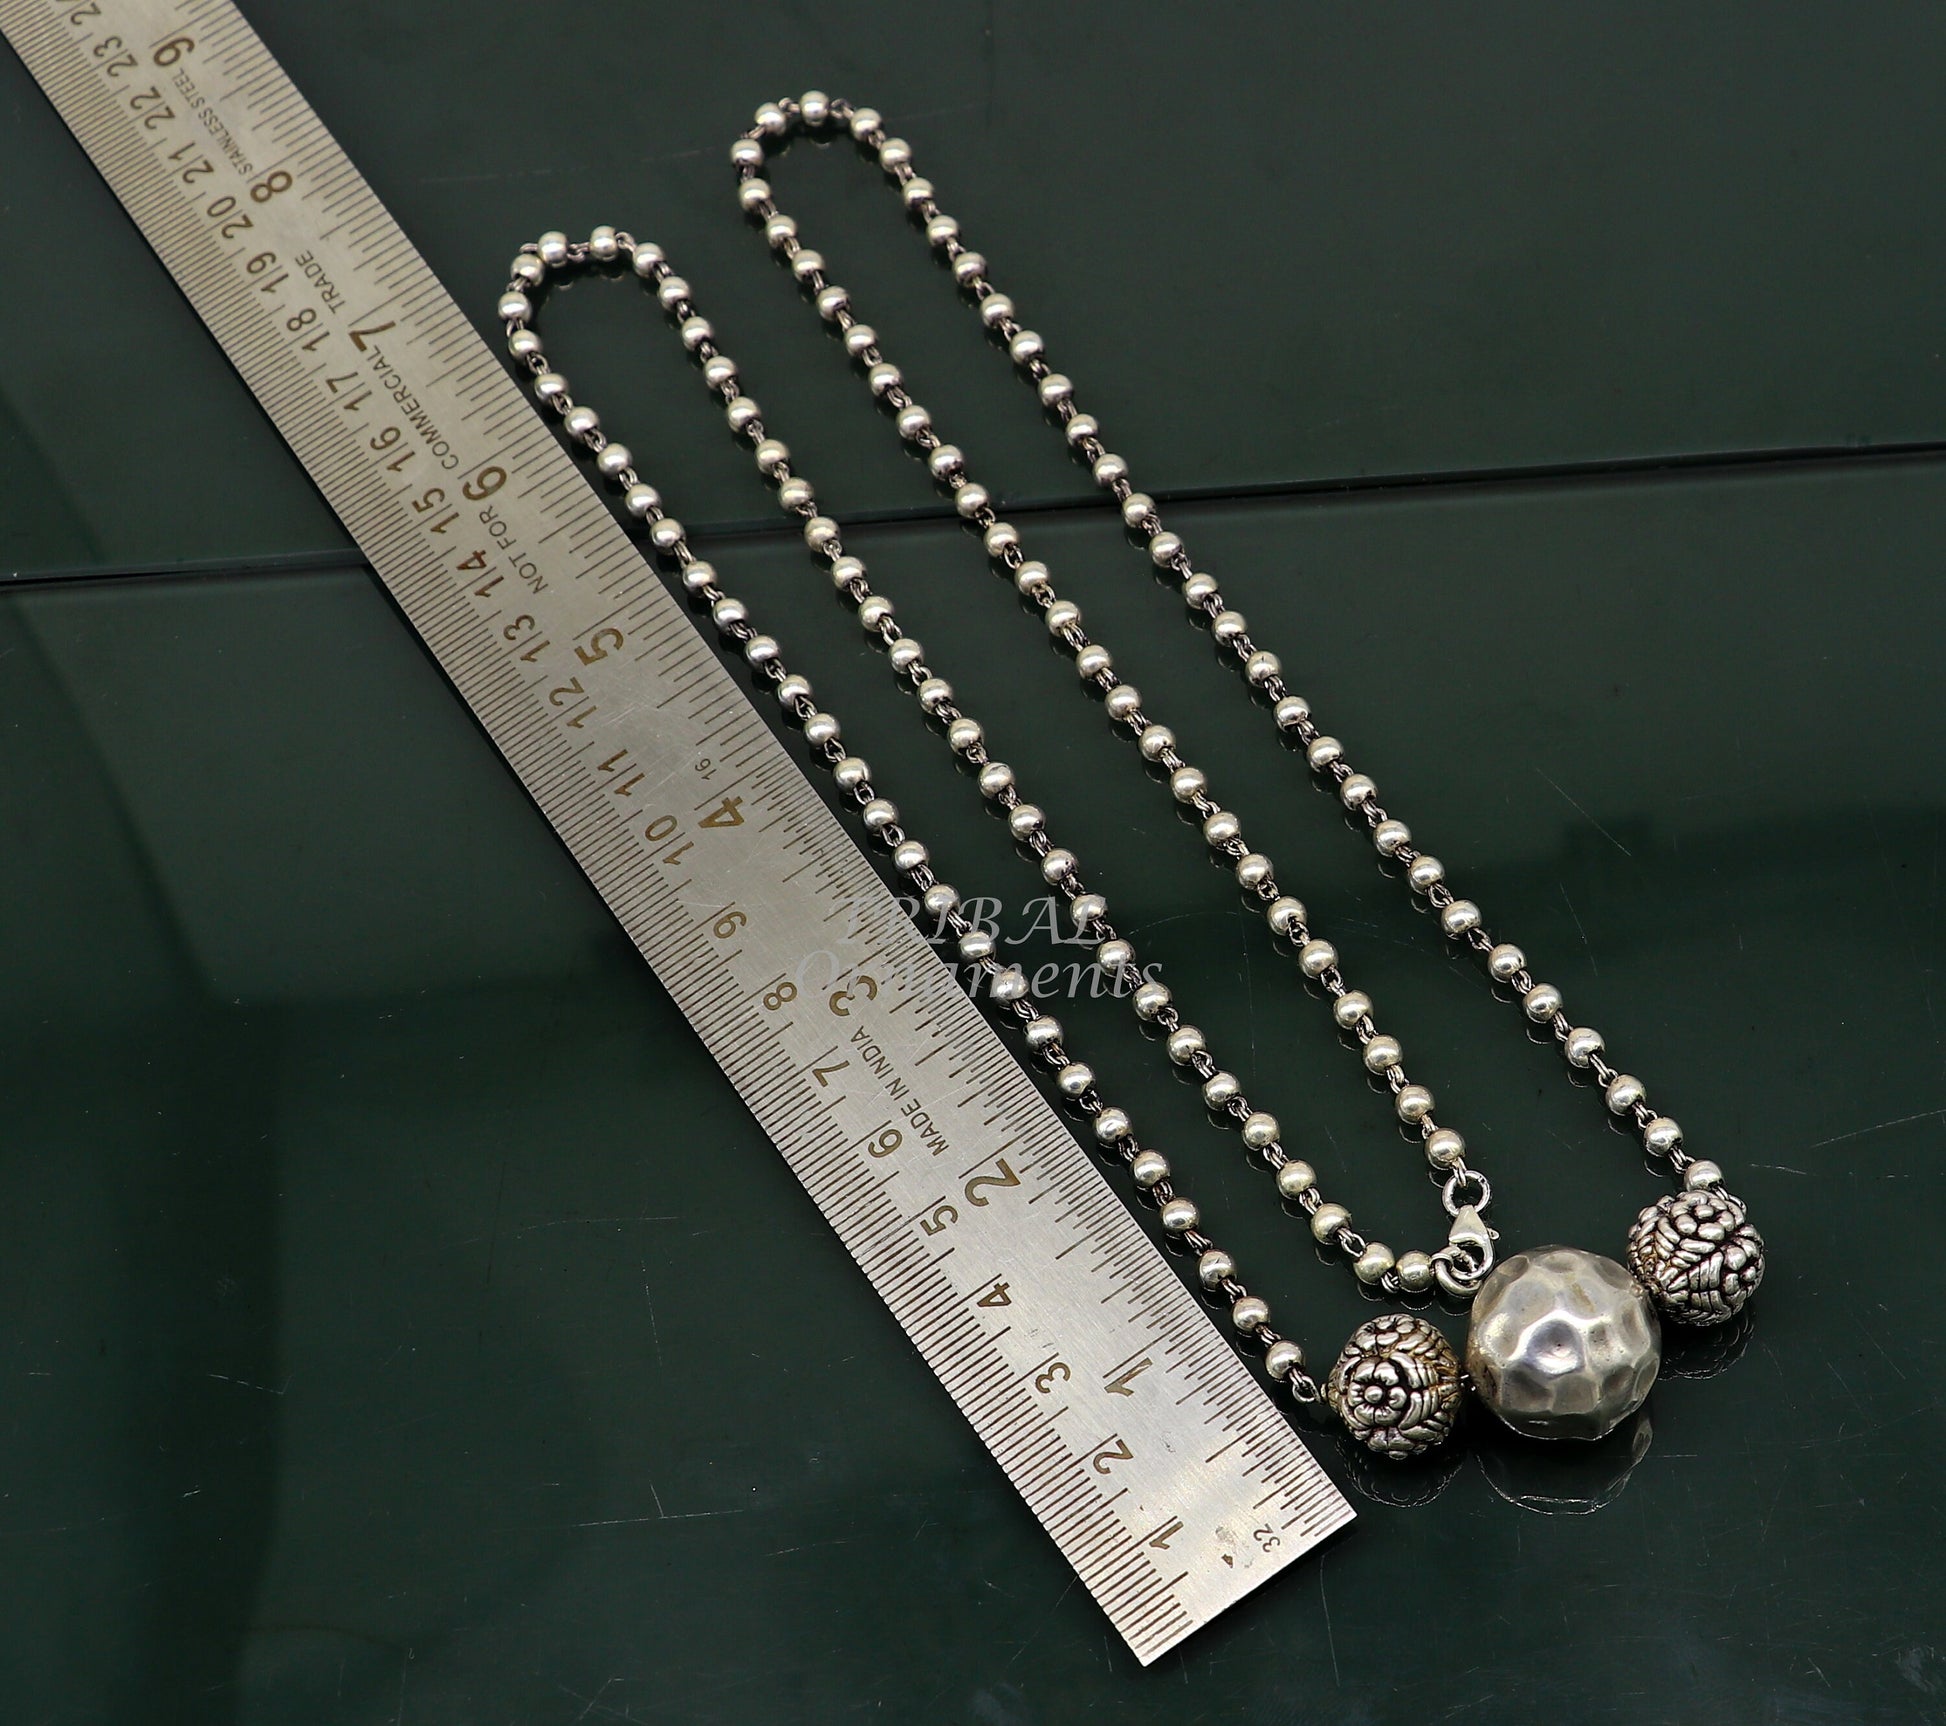 4mm Sterling Silver Bead Necklace Strand 13